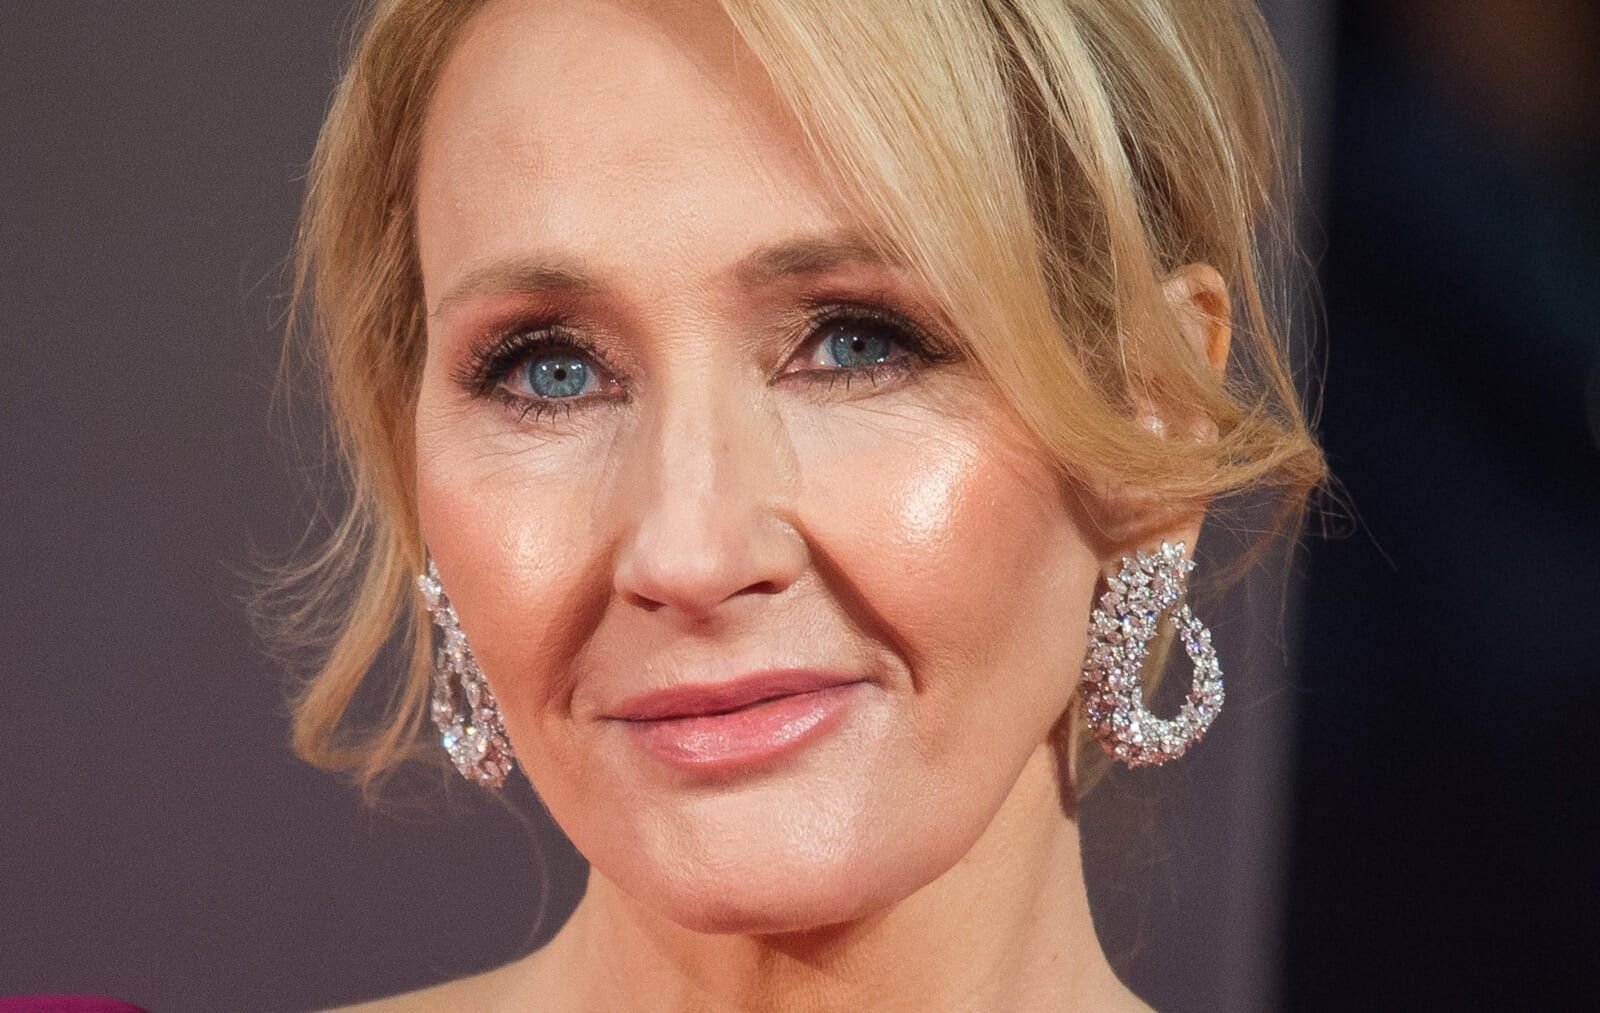 J.K. Rowling attends the 70th EE British Academy Film Awards (BAFTA) at Royal Albert Hall on February 12, 2017 in London, England.